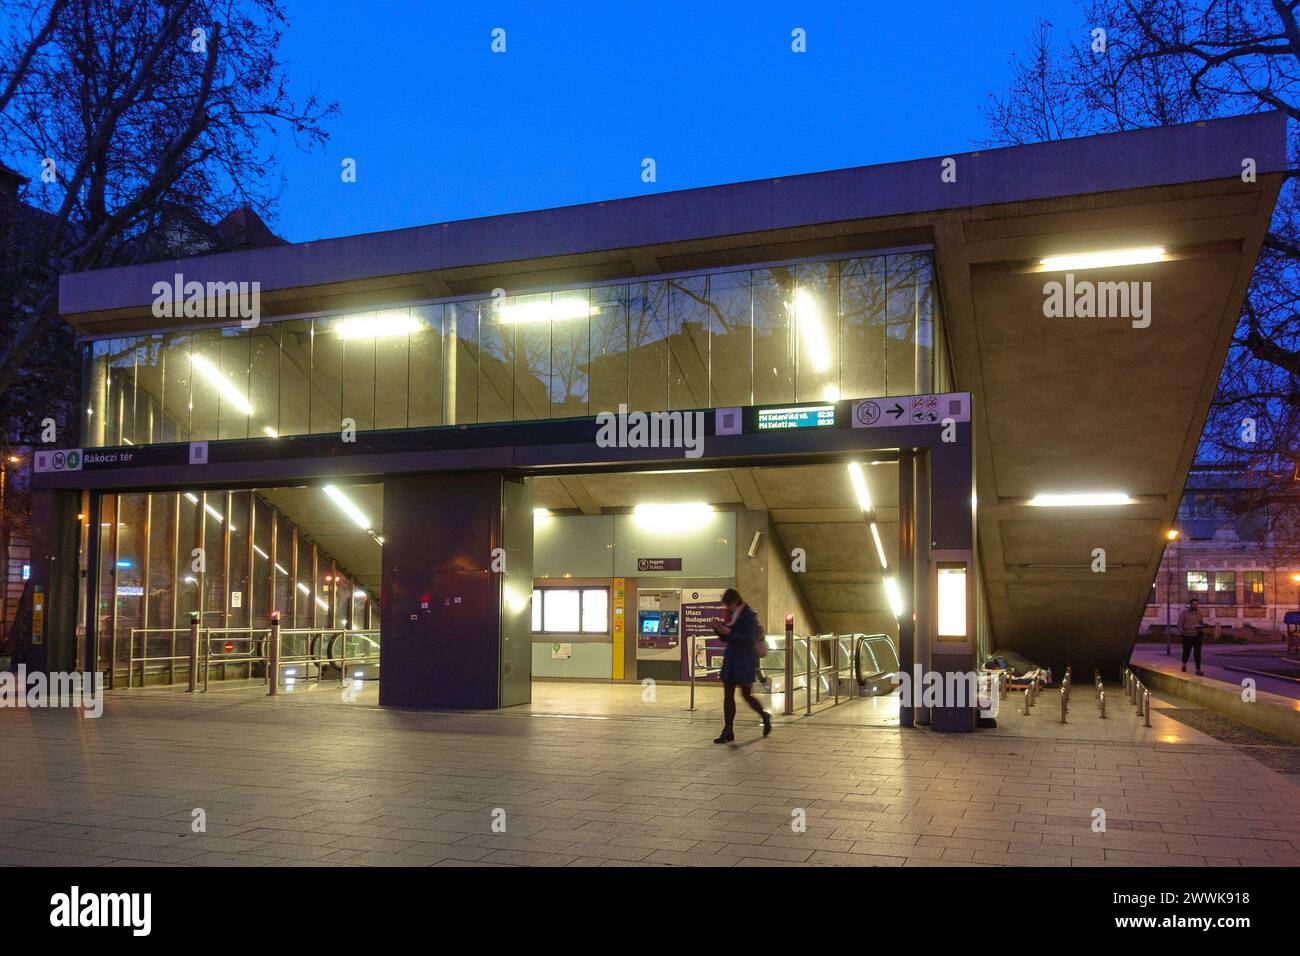 The entrance of the Rakoczi ter metro station on line 4 in Budapest Stock Photo